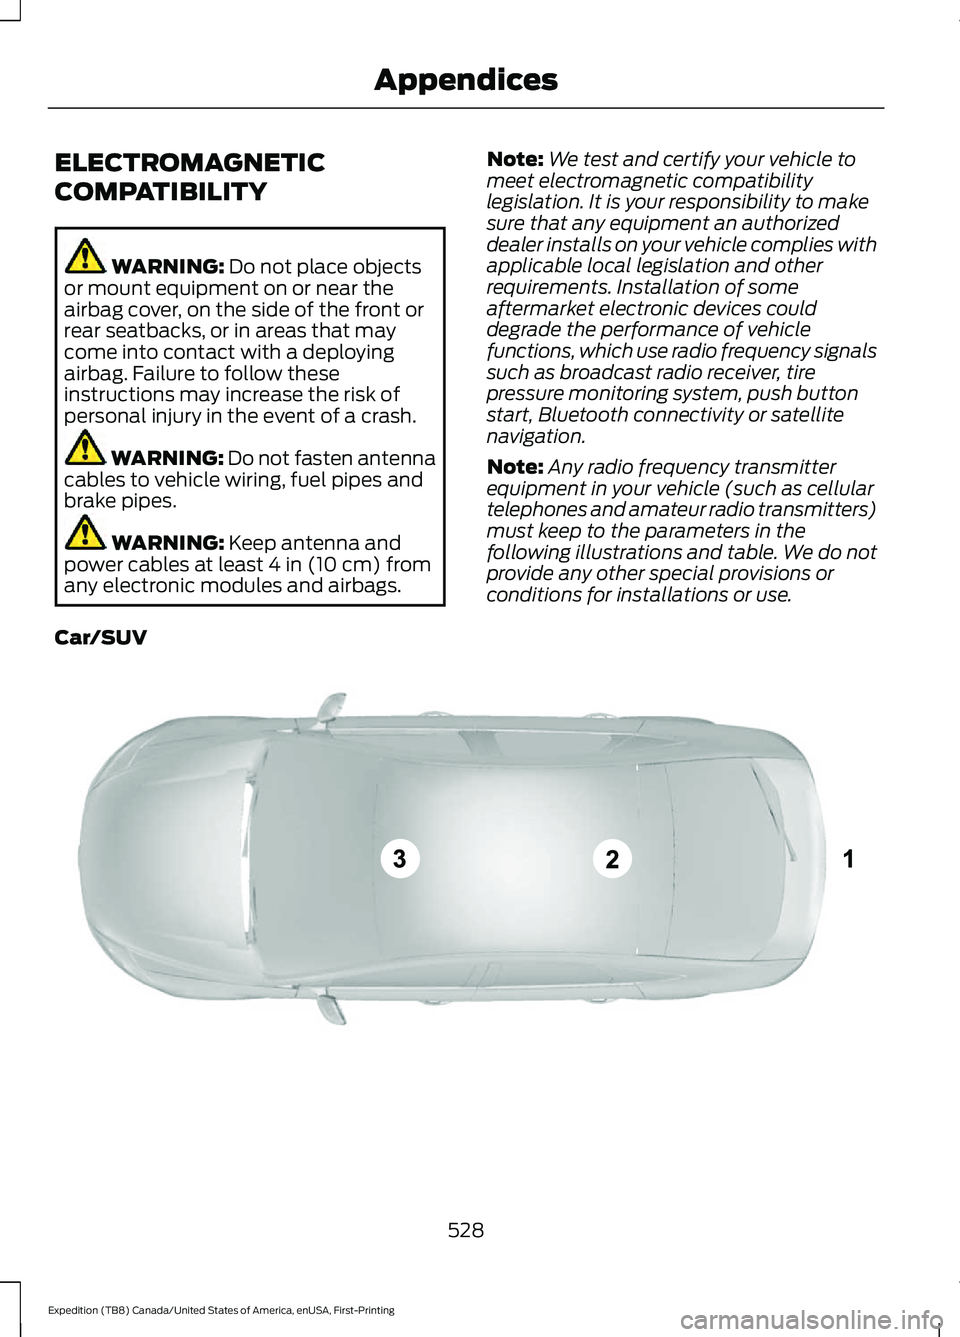 FORD EXPEDITION 2021  Owners Manual ELECTROMAGNETIC
COMPATIBILITY
WARNING: Do not place objects
or mount equipment on or near the
airbag cover, on the side of the front or
rear seatbacks, or in areas that may
come into contact with a de